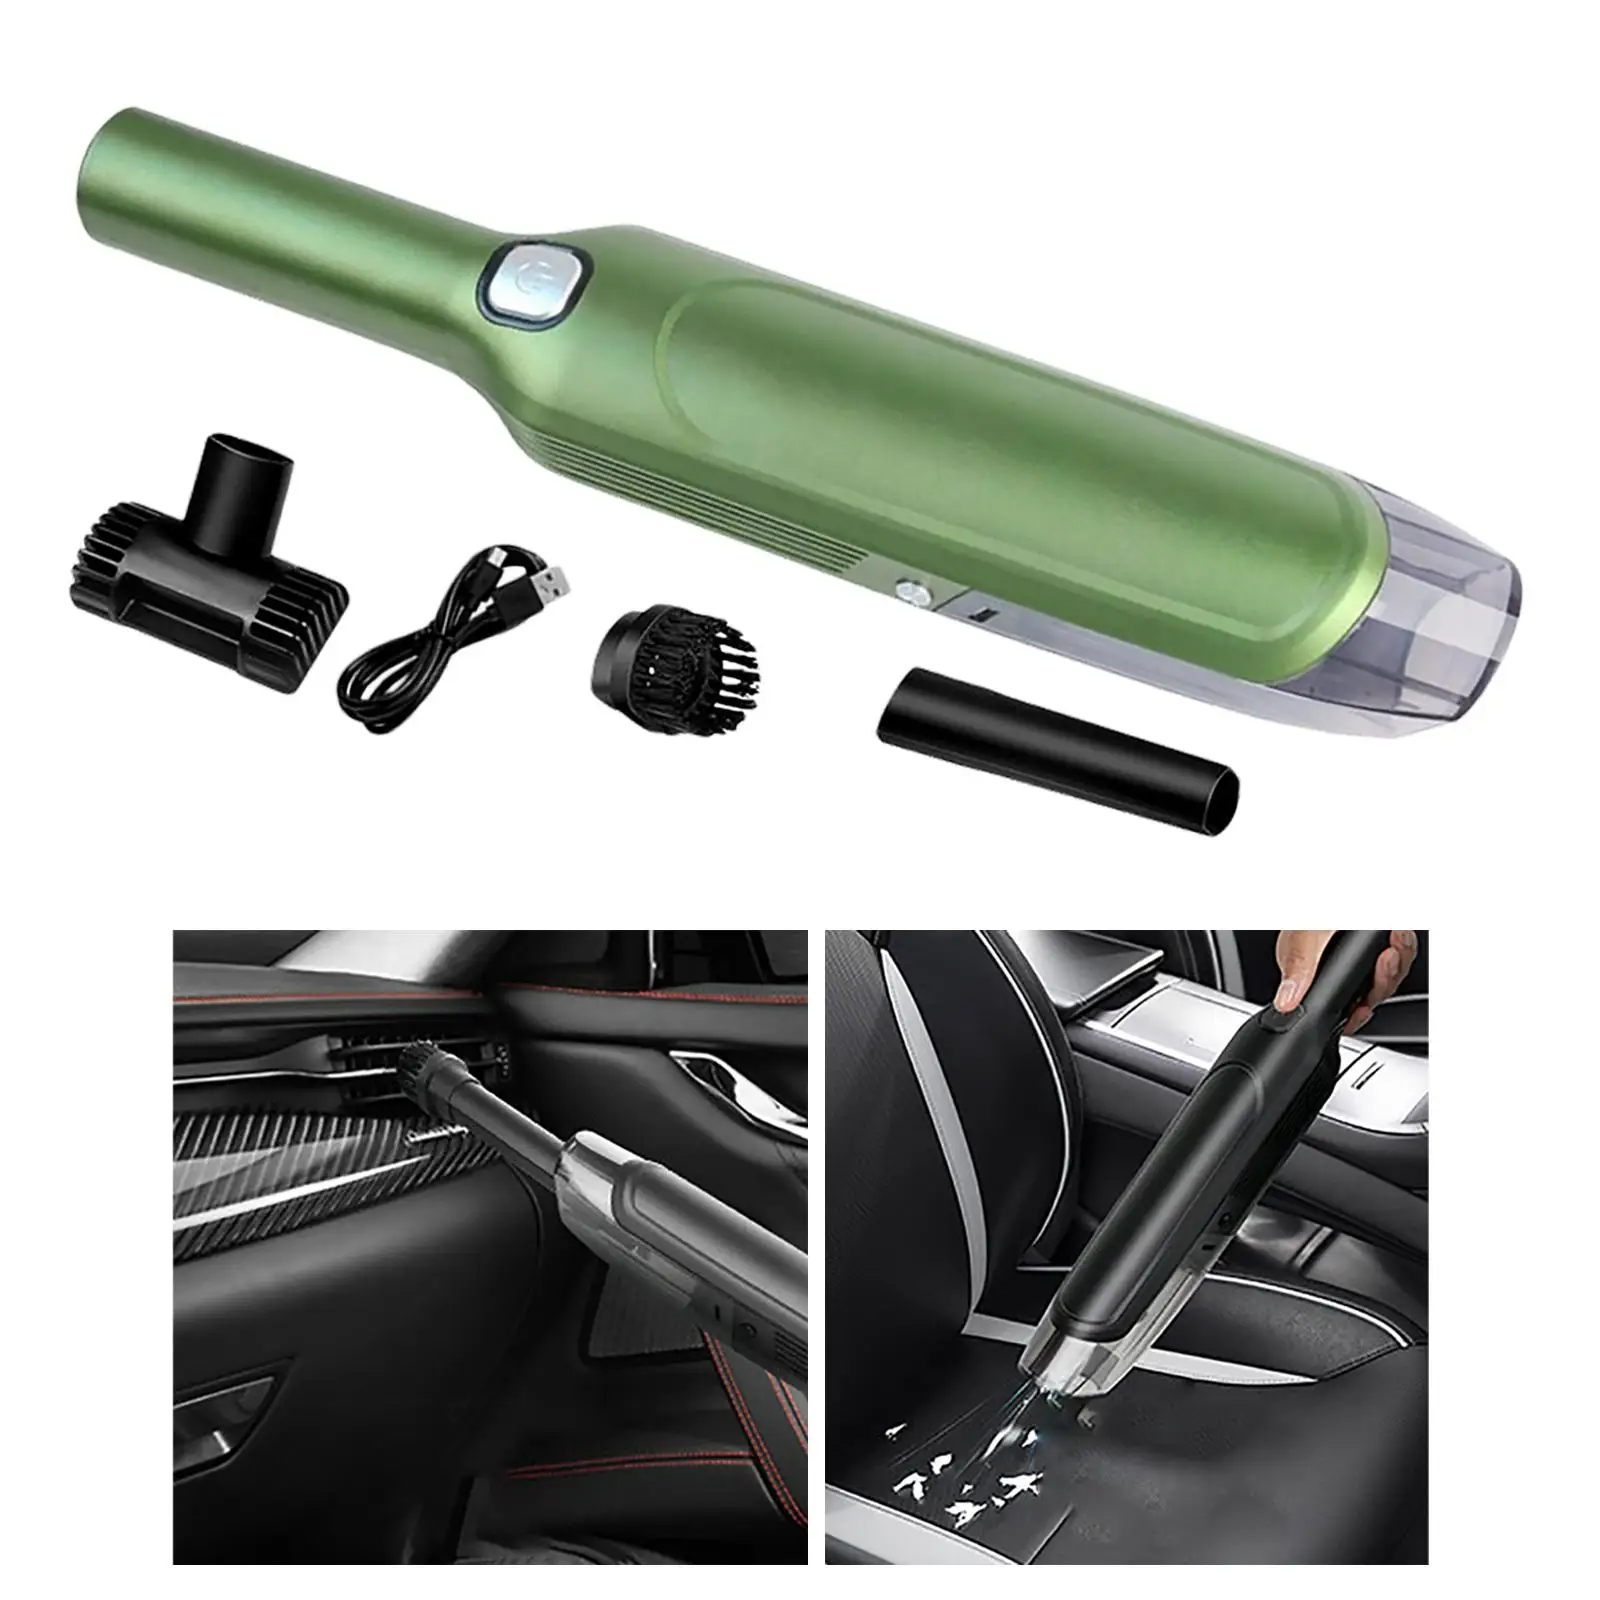 Portable Car Vacuum Cleaner 4000mAh Battery USB Rechargeable Dust